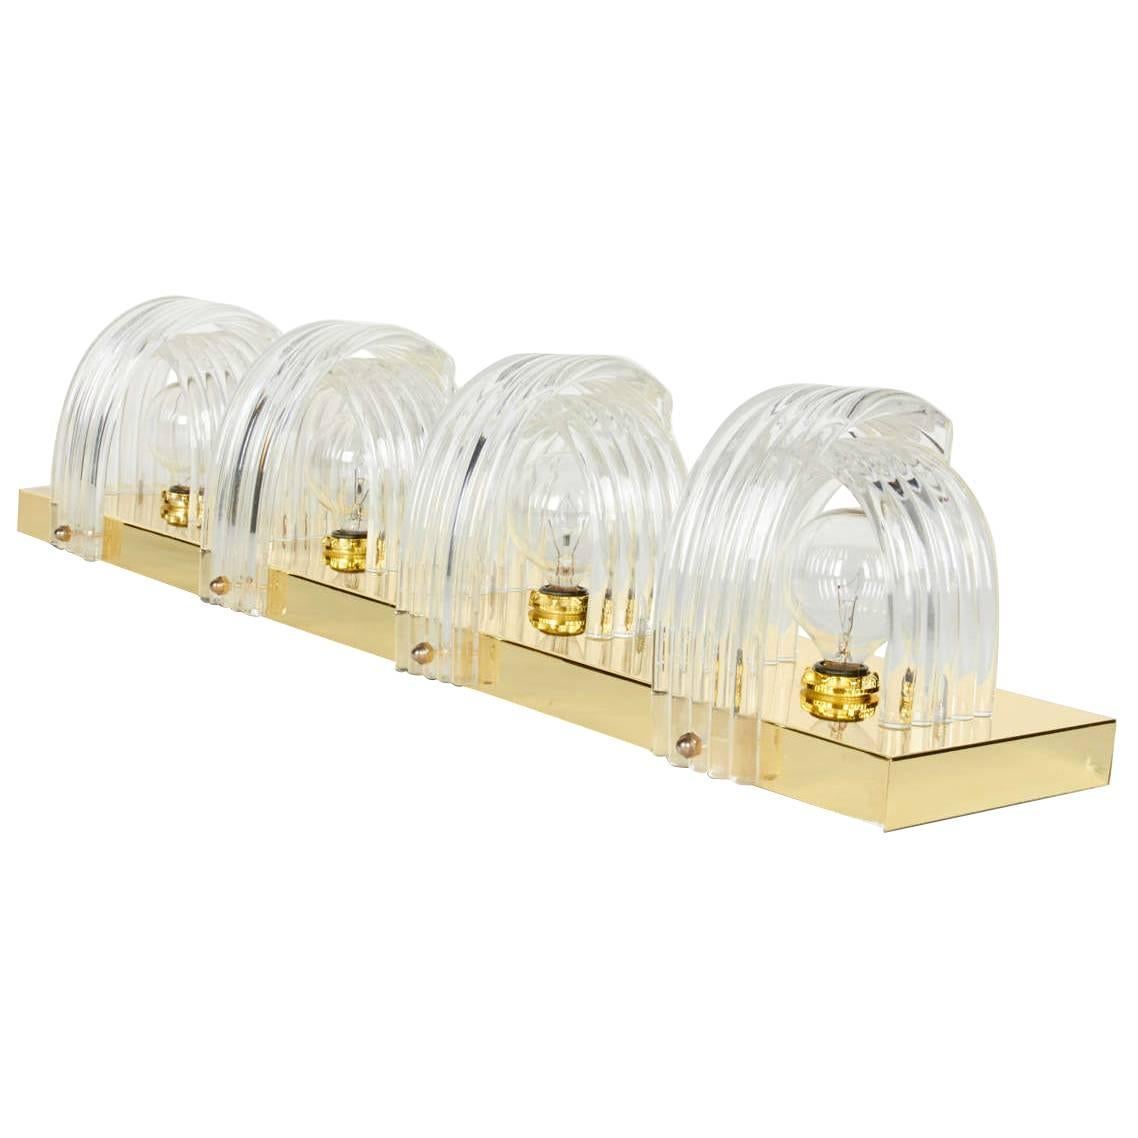 Hollywood Regency mid-century wall light comprised of polished brass frame, with sculptural shades comprised of molded lucite. The four series of curved Lucite rings create beautiful prism lighting, while concealing the light bulbs. Perfect lighting